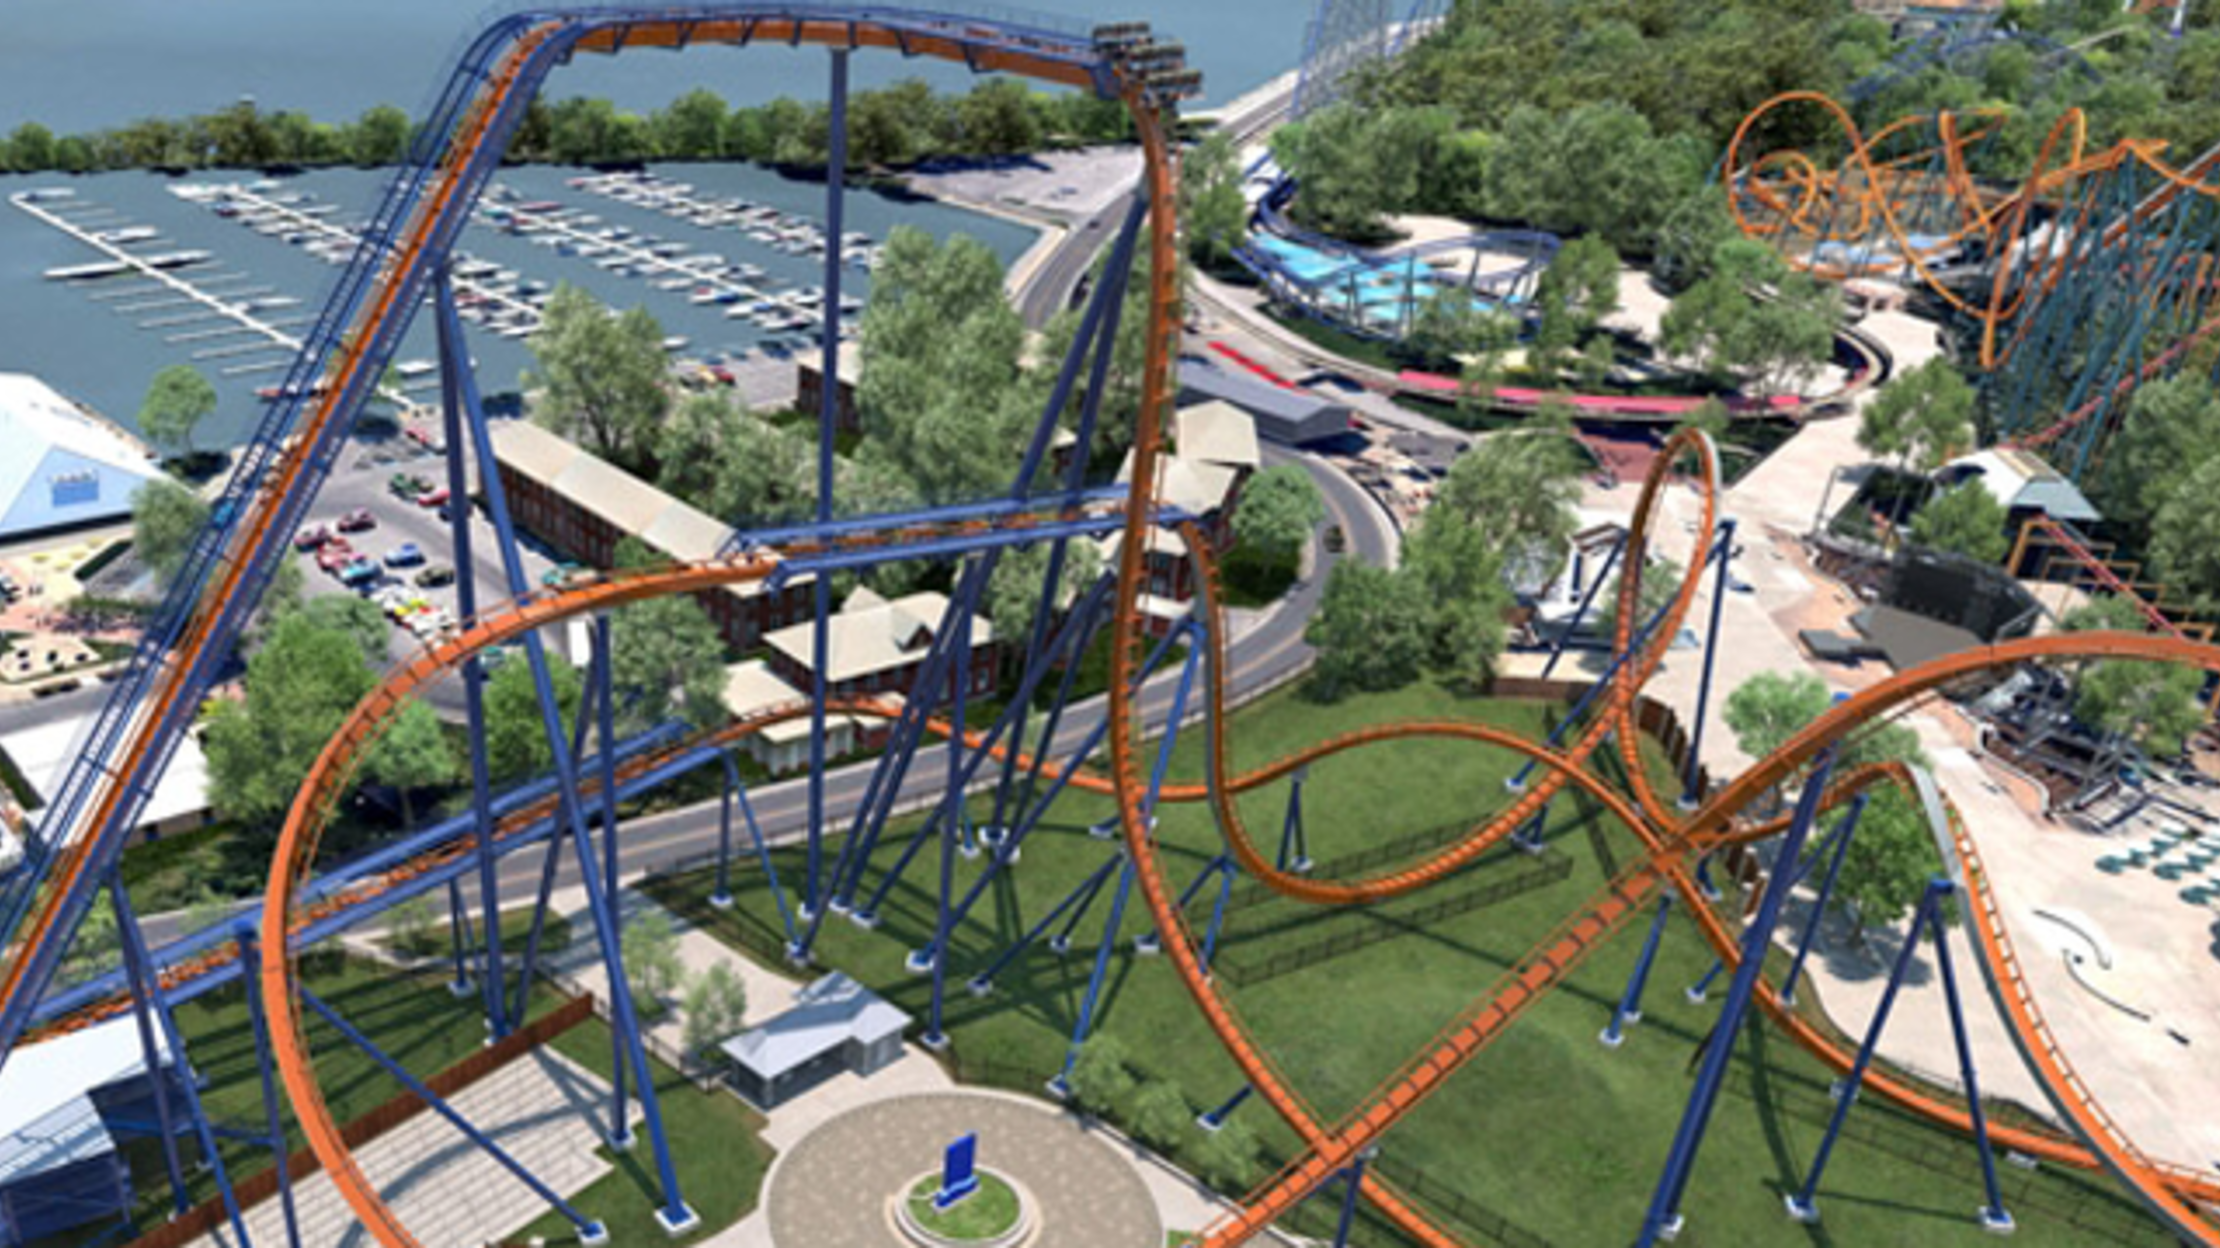 Ohio's New, Record-Breaking Roller Coaster Opens This Weekend | Mental ...